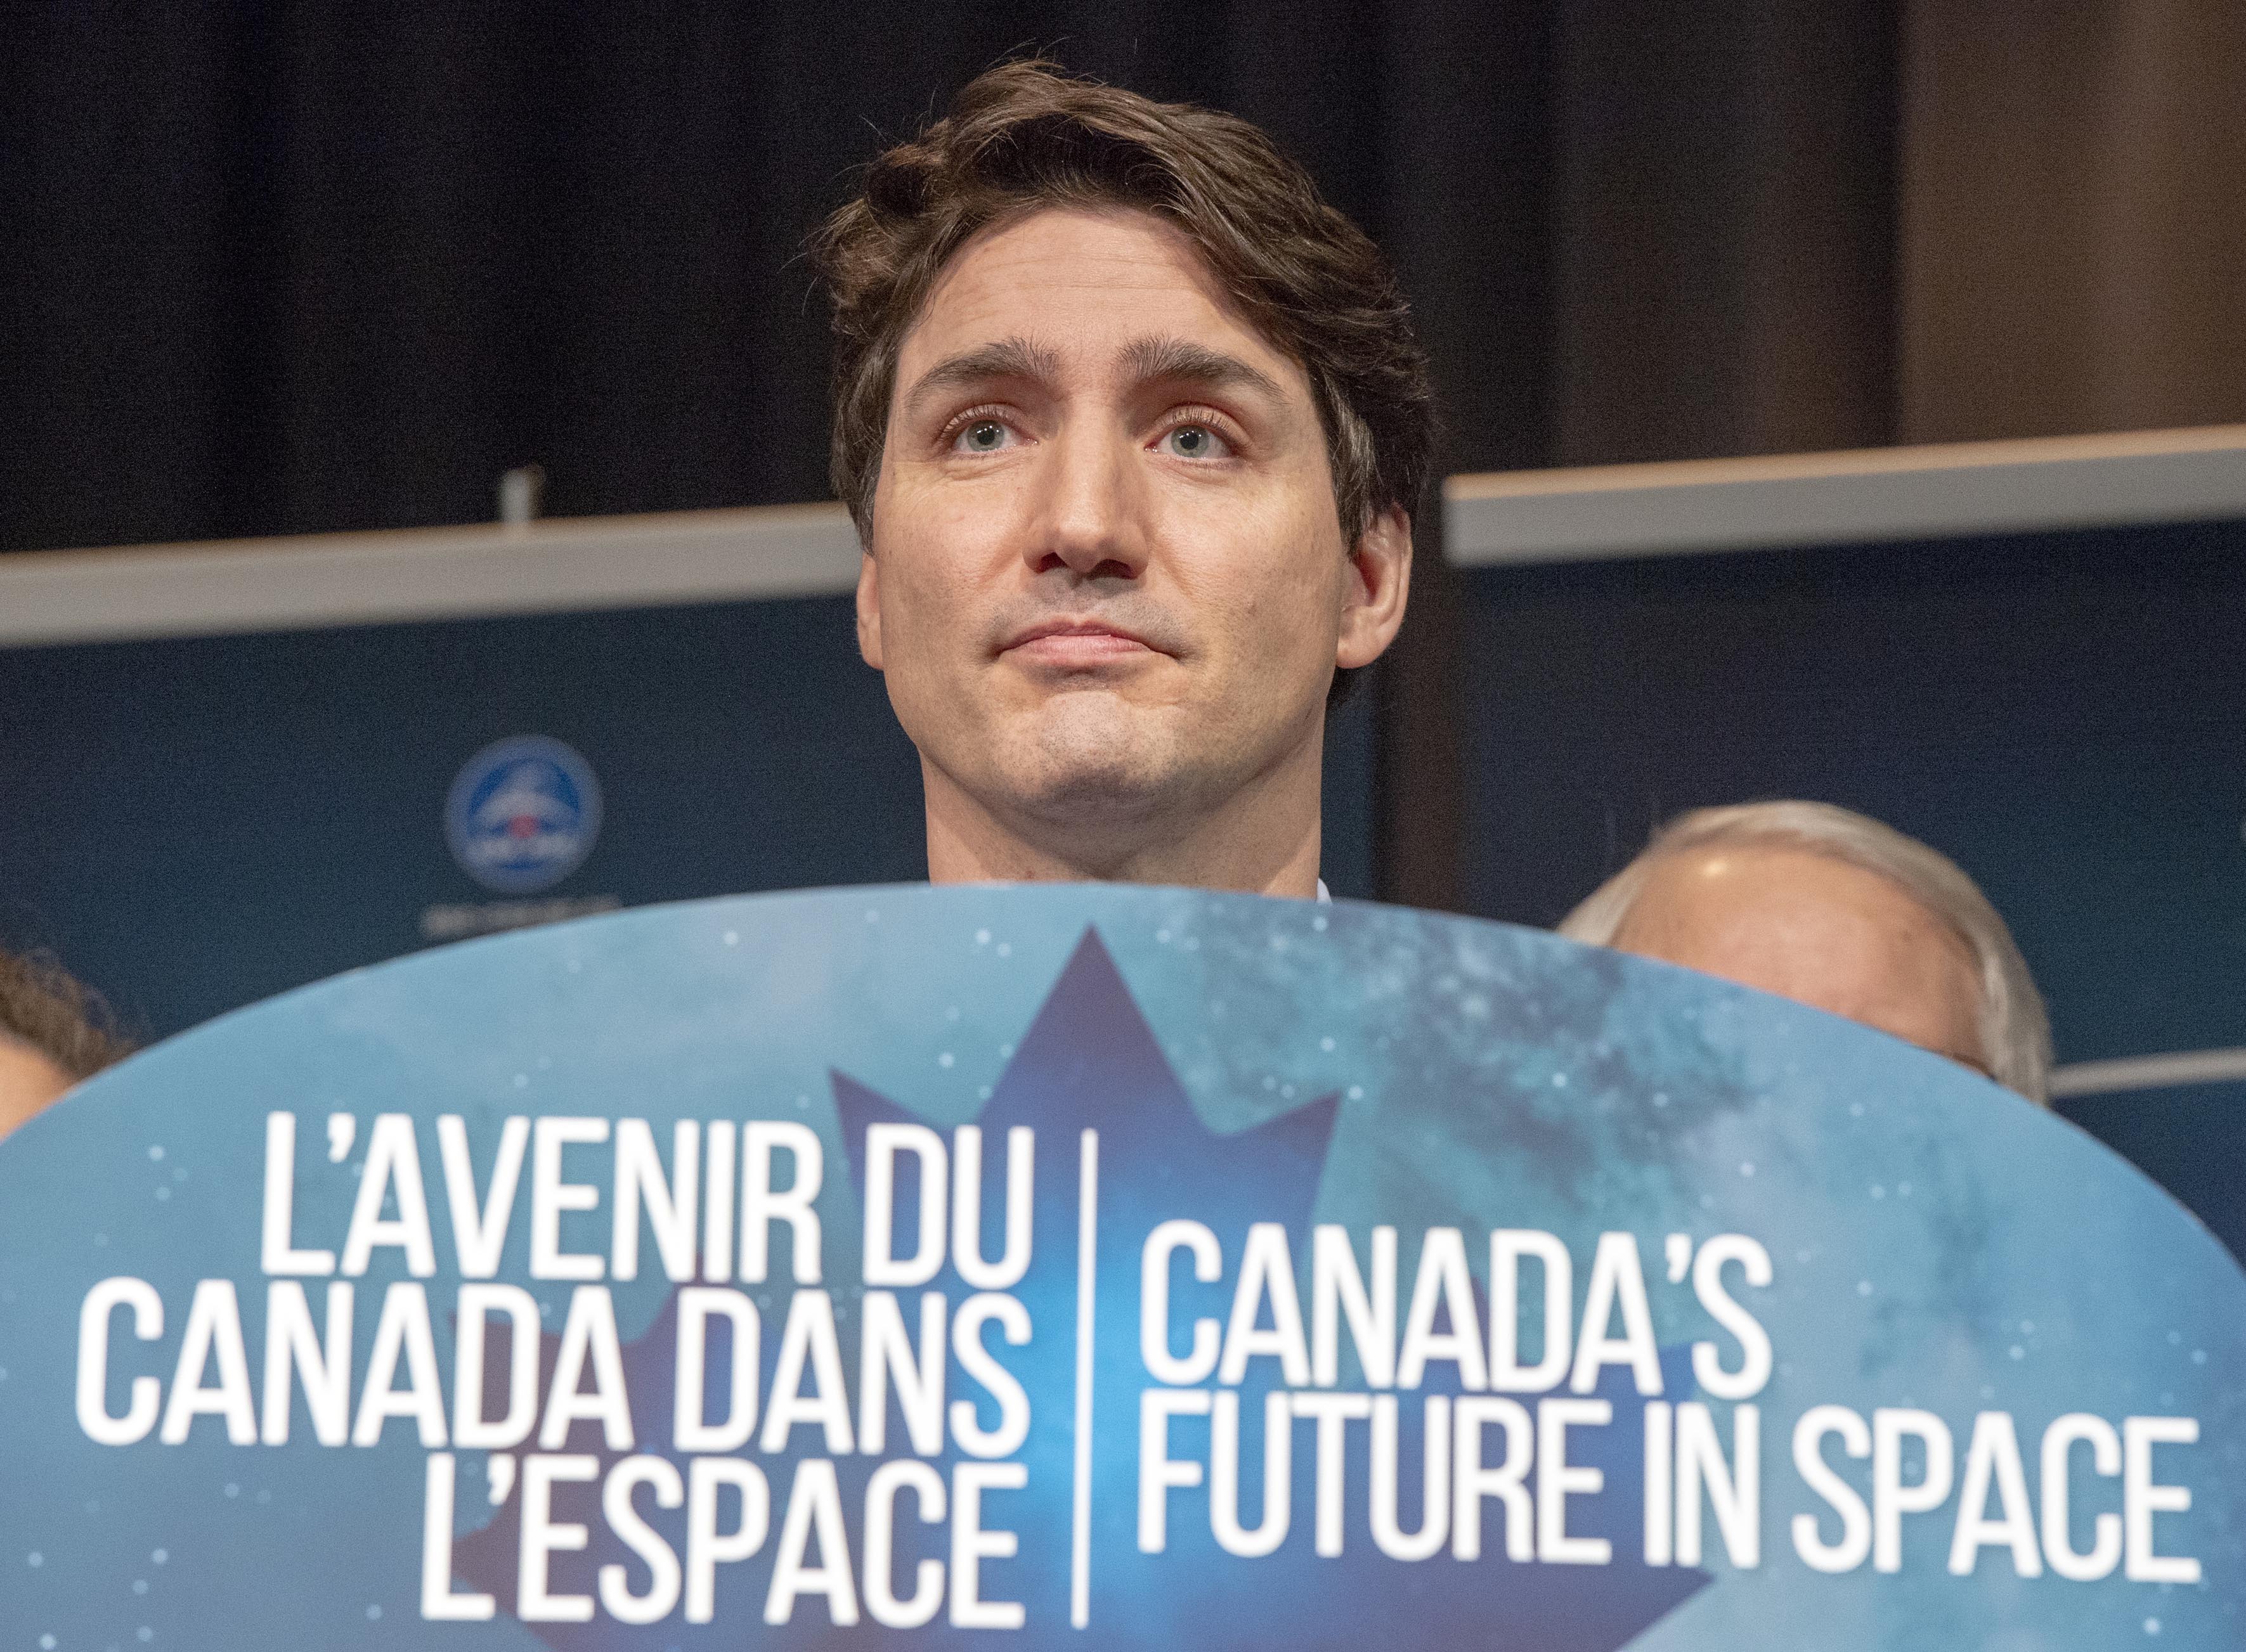 Canada's Prime Minister Justin Trudeau announces during a news conference, Thursday, Feb. 28, 2019, at the Canadian Space Agency headquarters in St. Hubert, Quebec, that Canada will take part in an international lunar space station project. Photo: AP